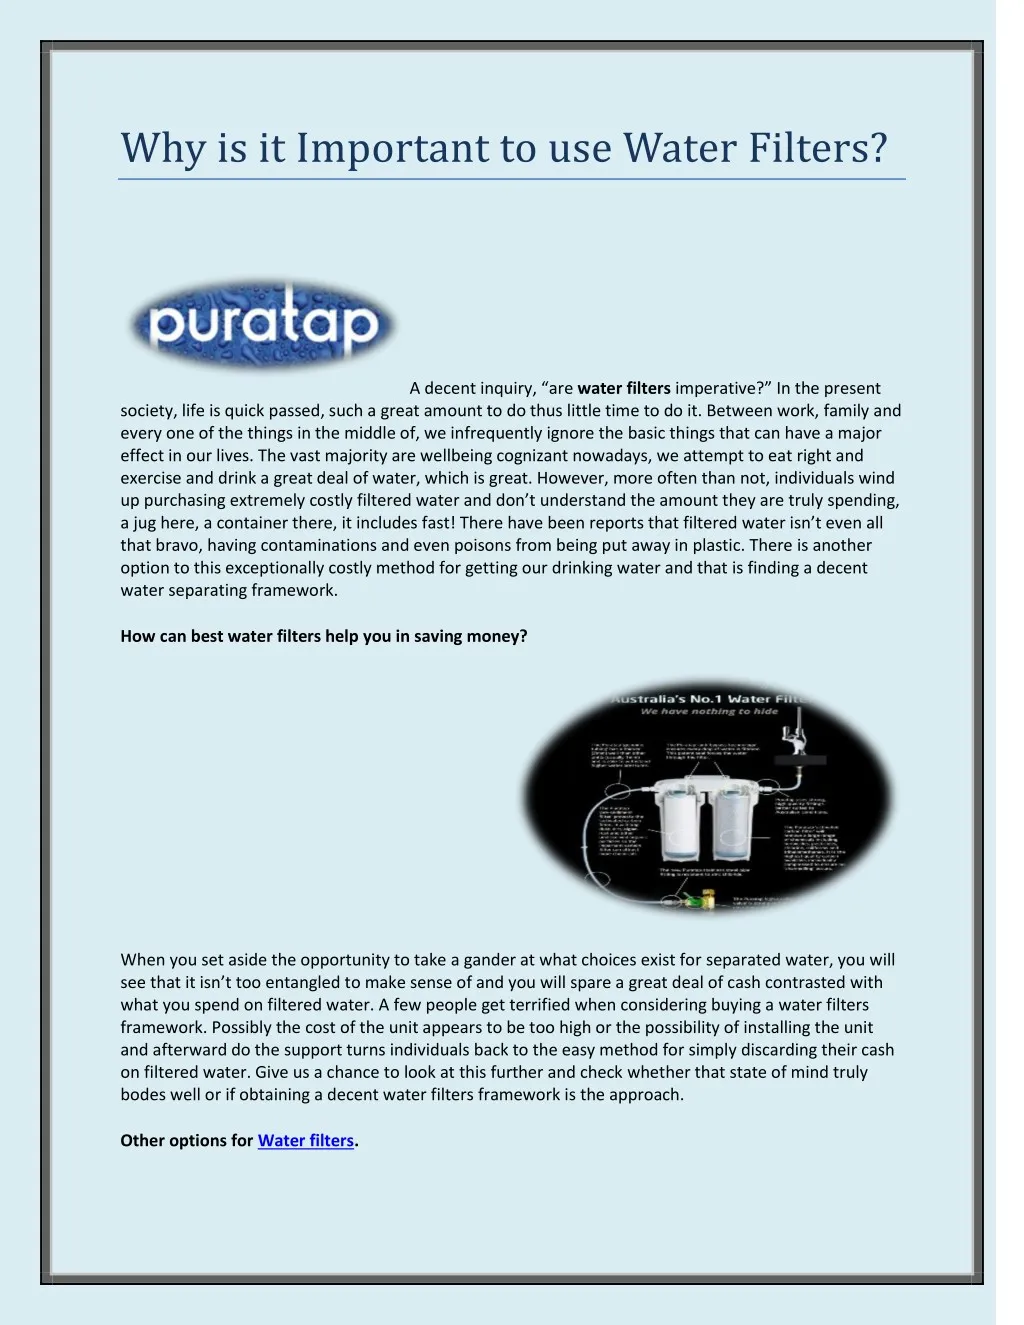 why is it important to use water filters